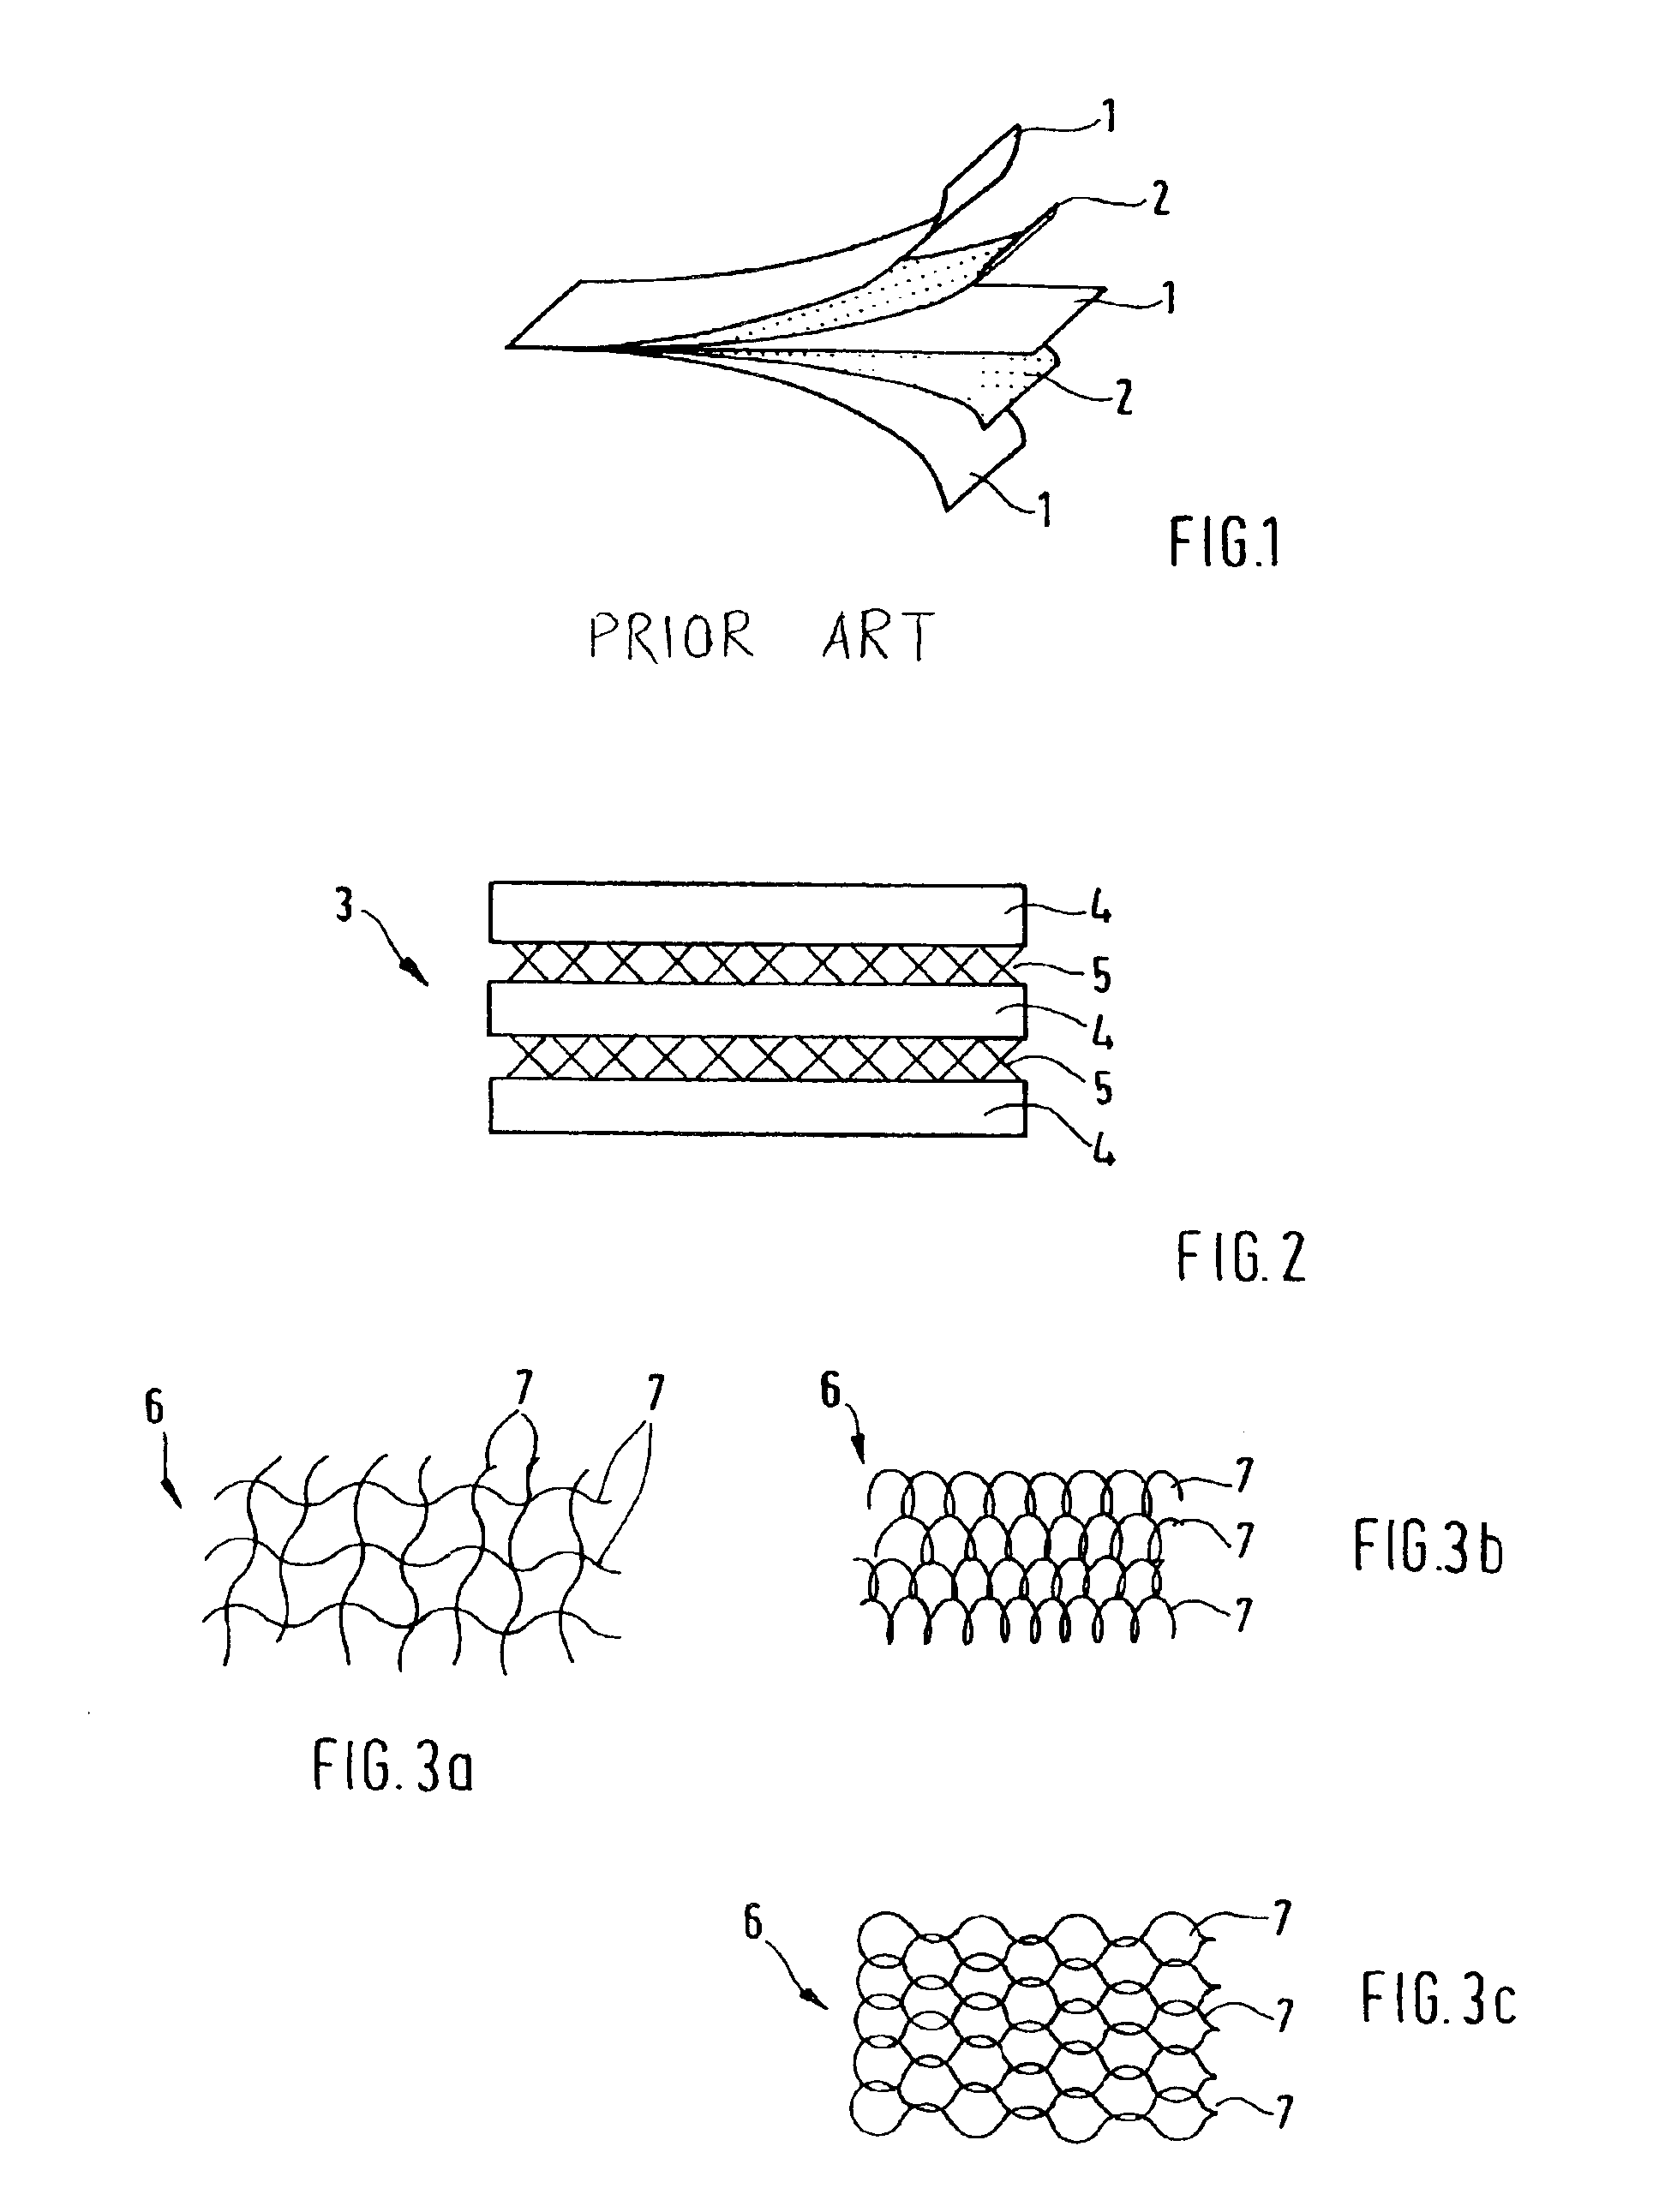 Metal fiber-reinforced composite material as well as a method for its production